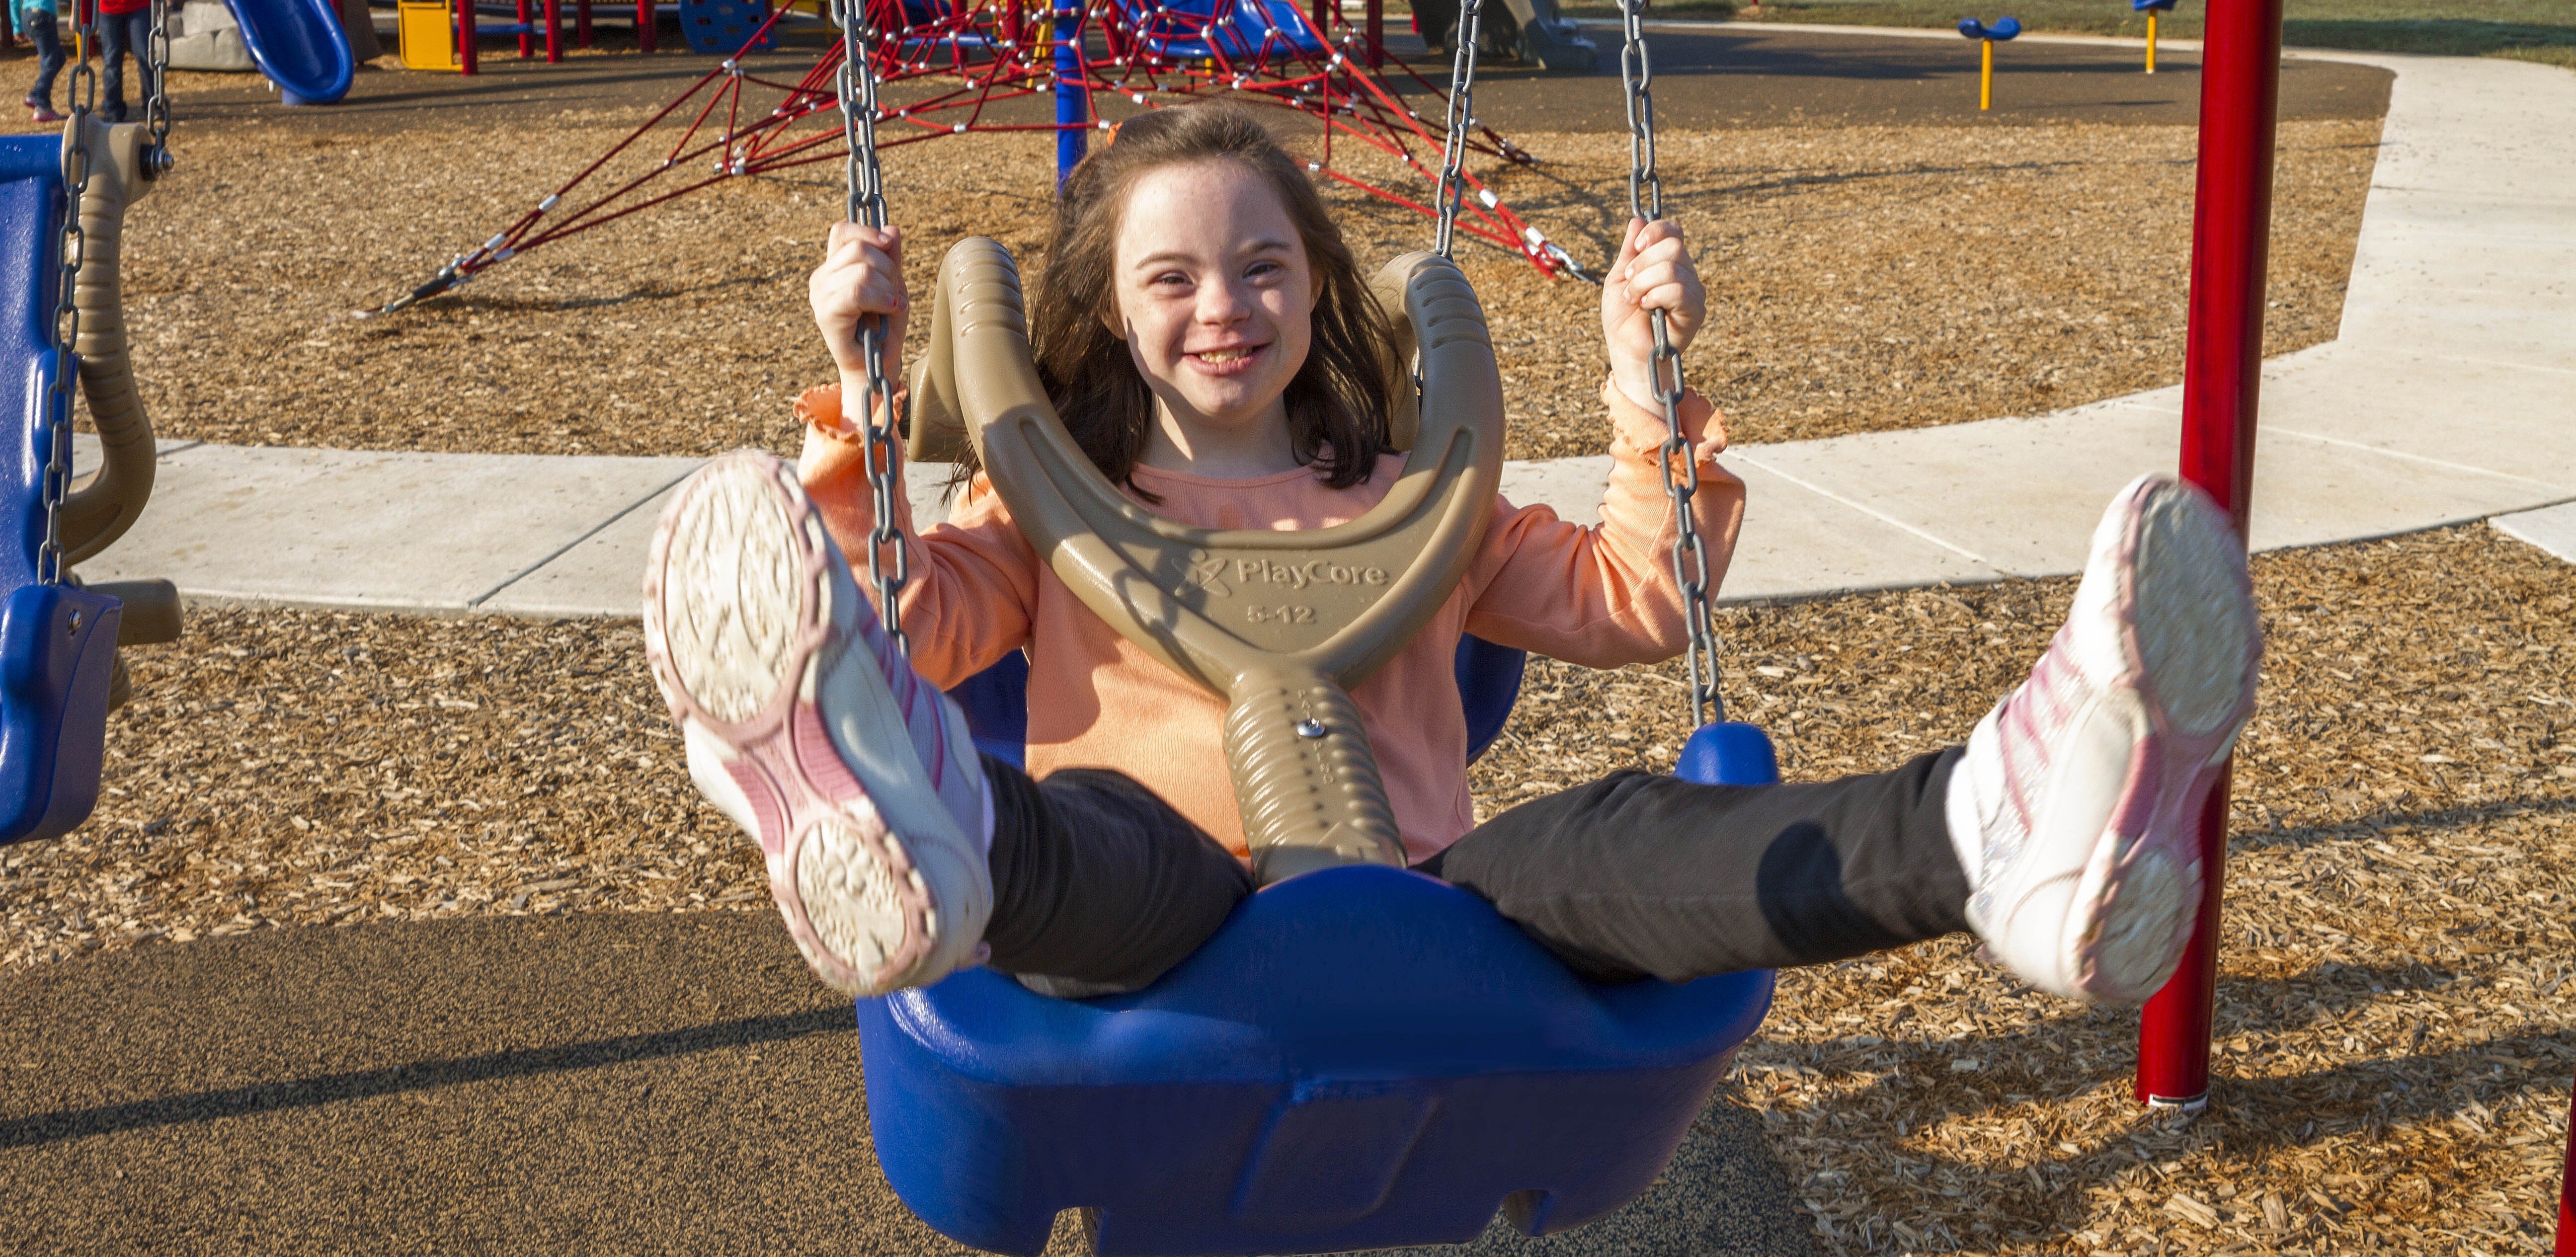 Restoring Inclusive Play to a Community